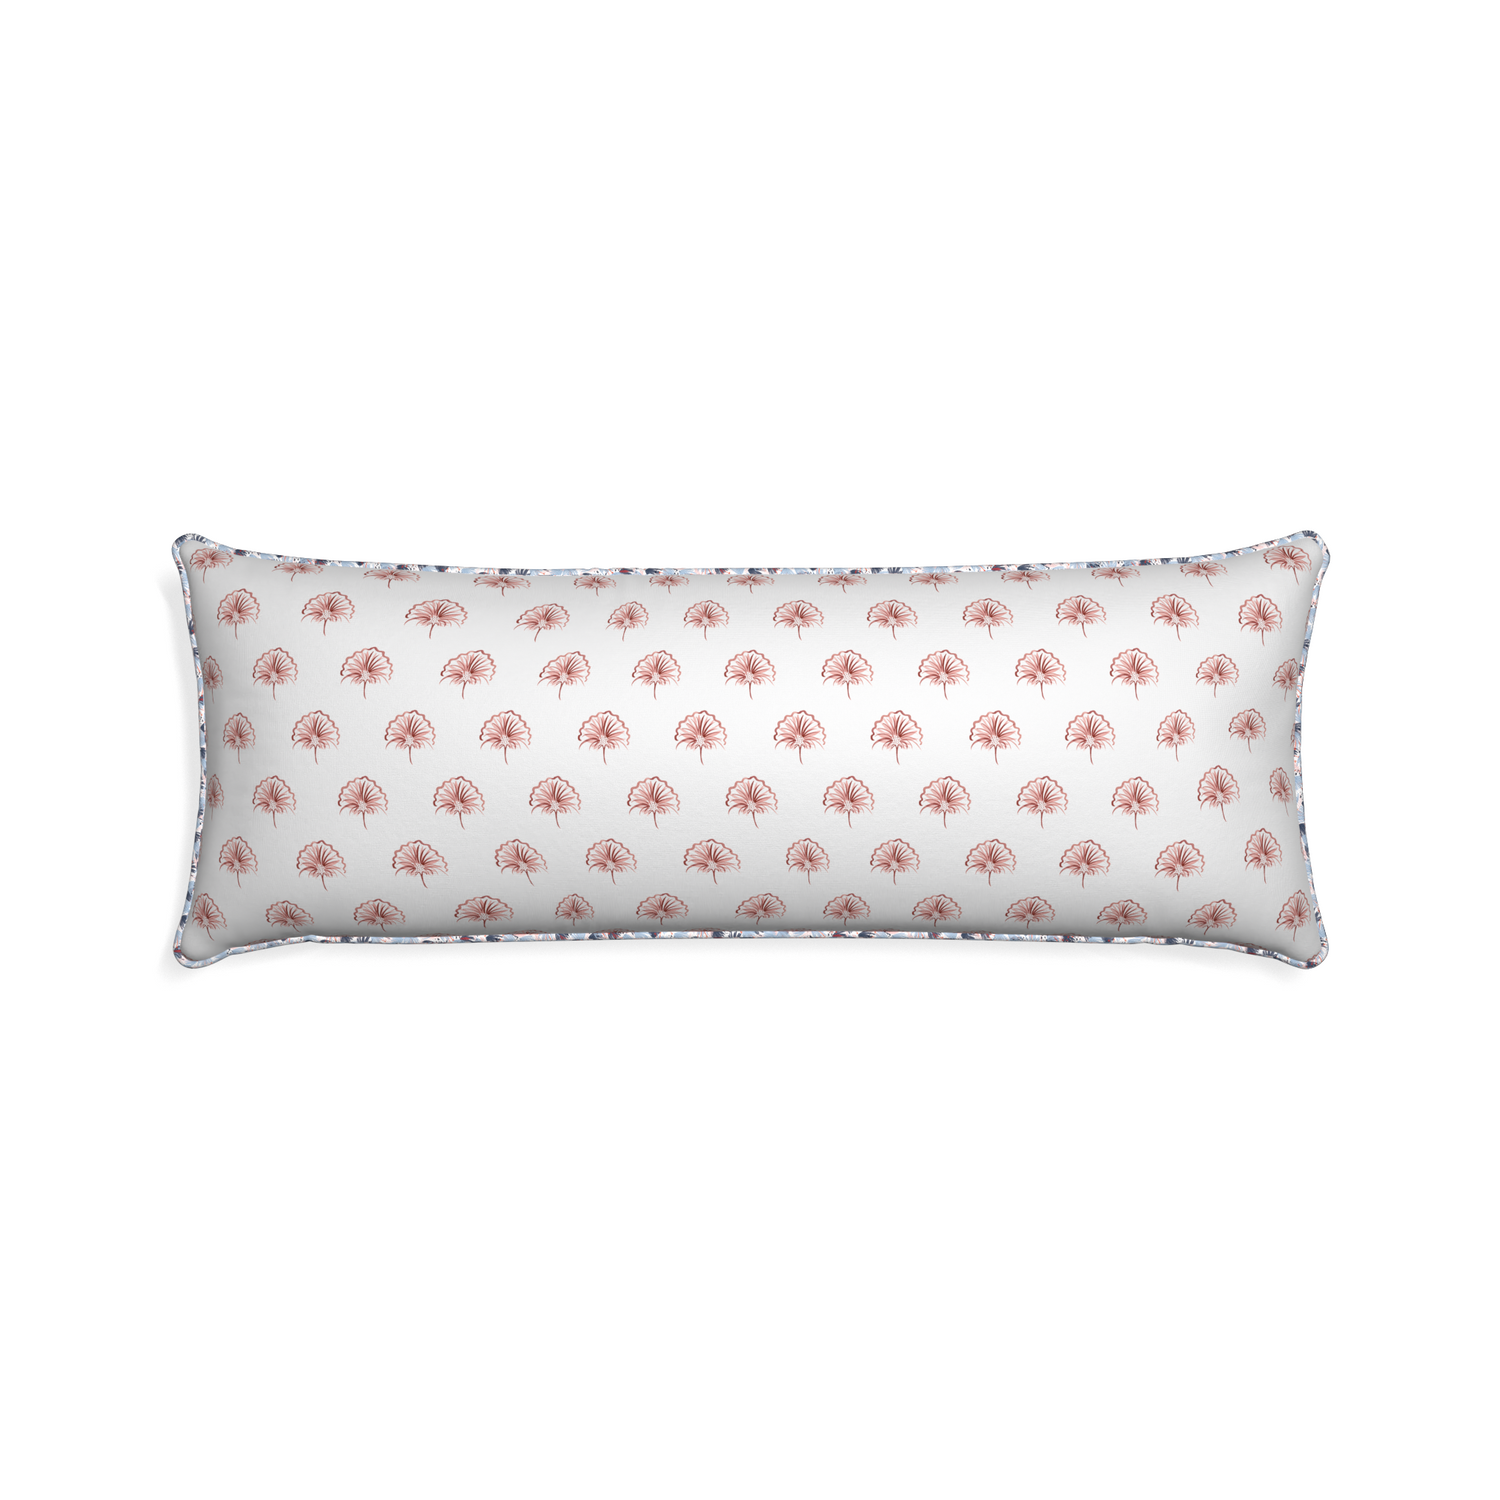 Xl-lumbar penelope rose custom pillow with e piping on white background